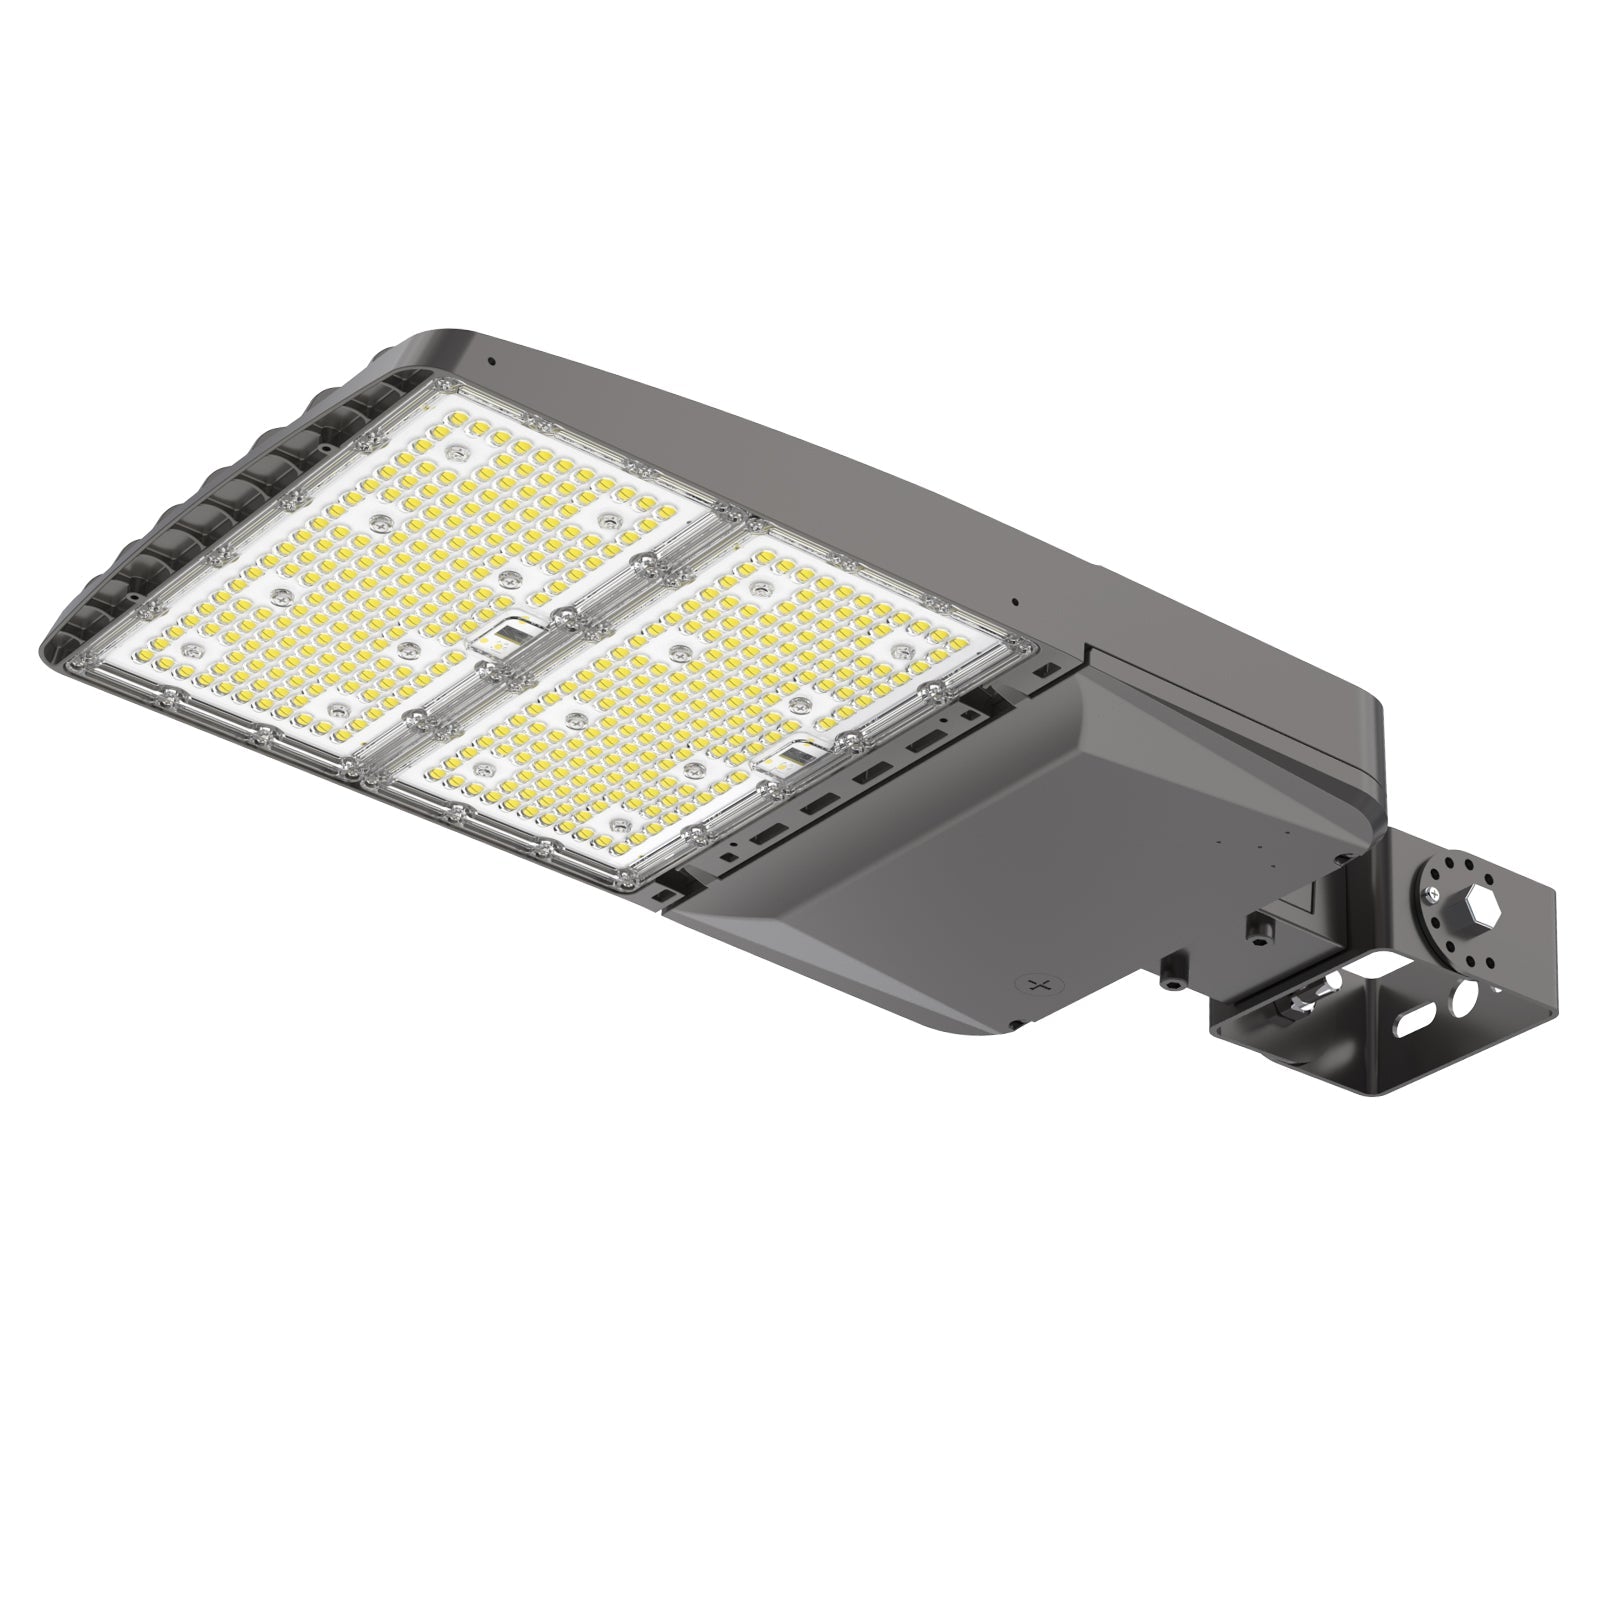 Commercial XALH Series Area Light - With Shortcap, AC 277V-480V, 240/260/280/310W